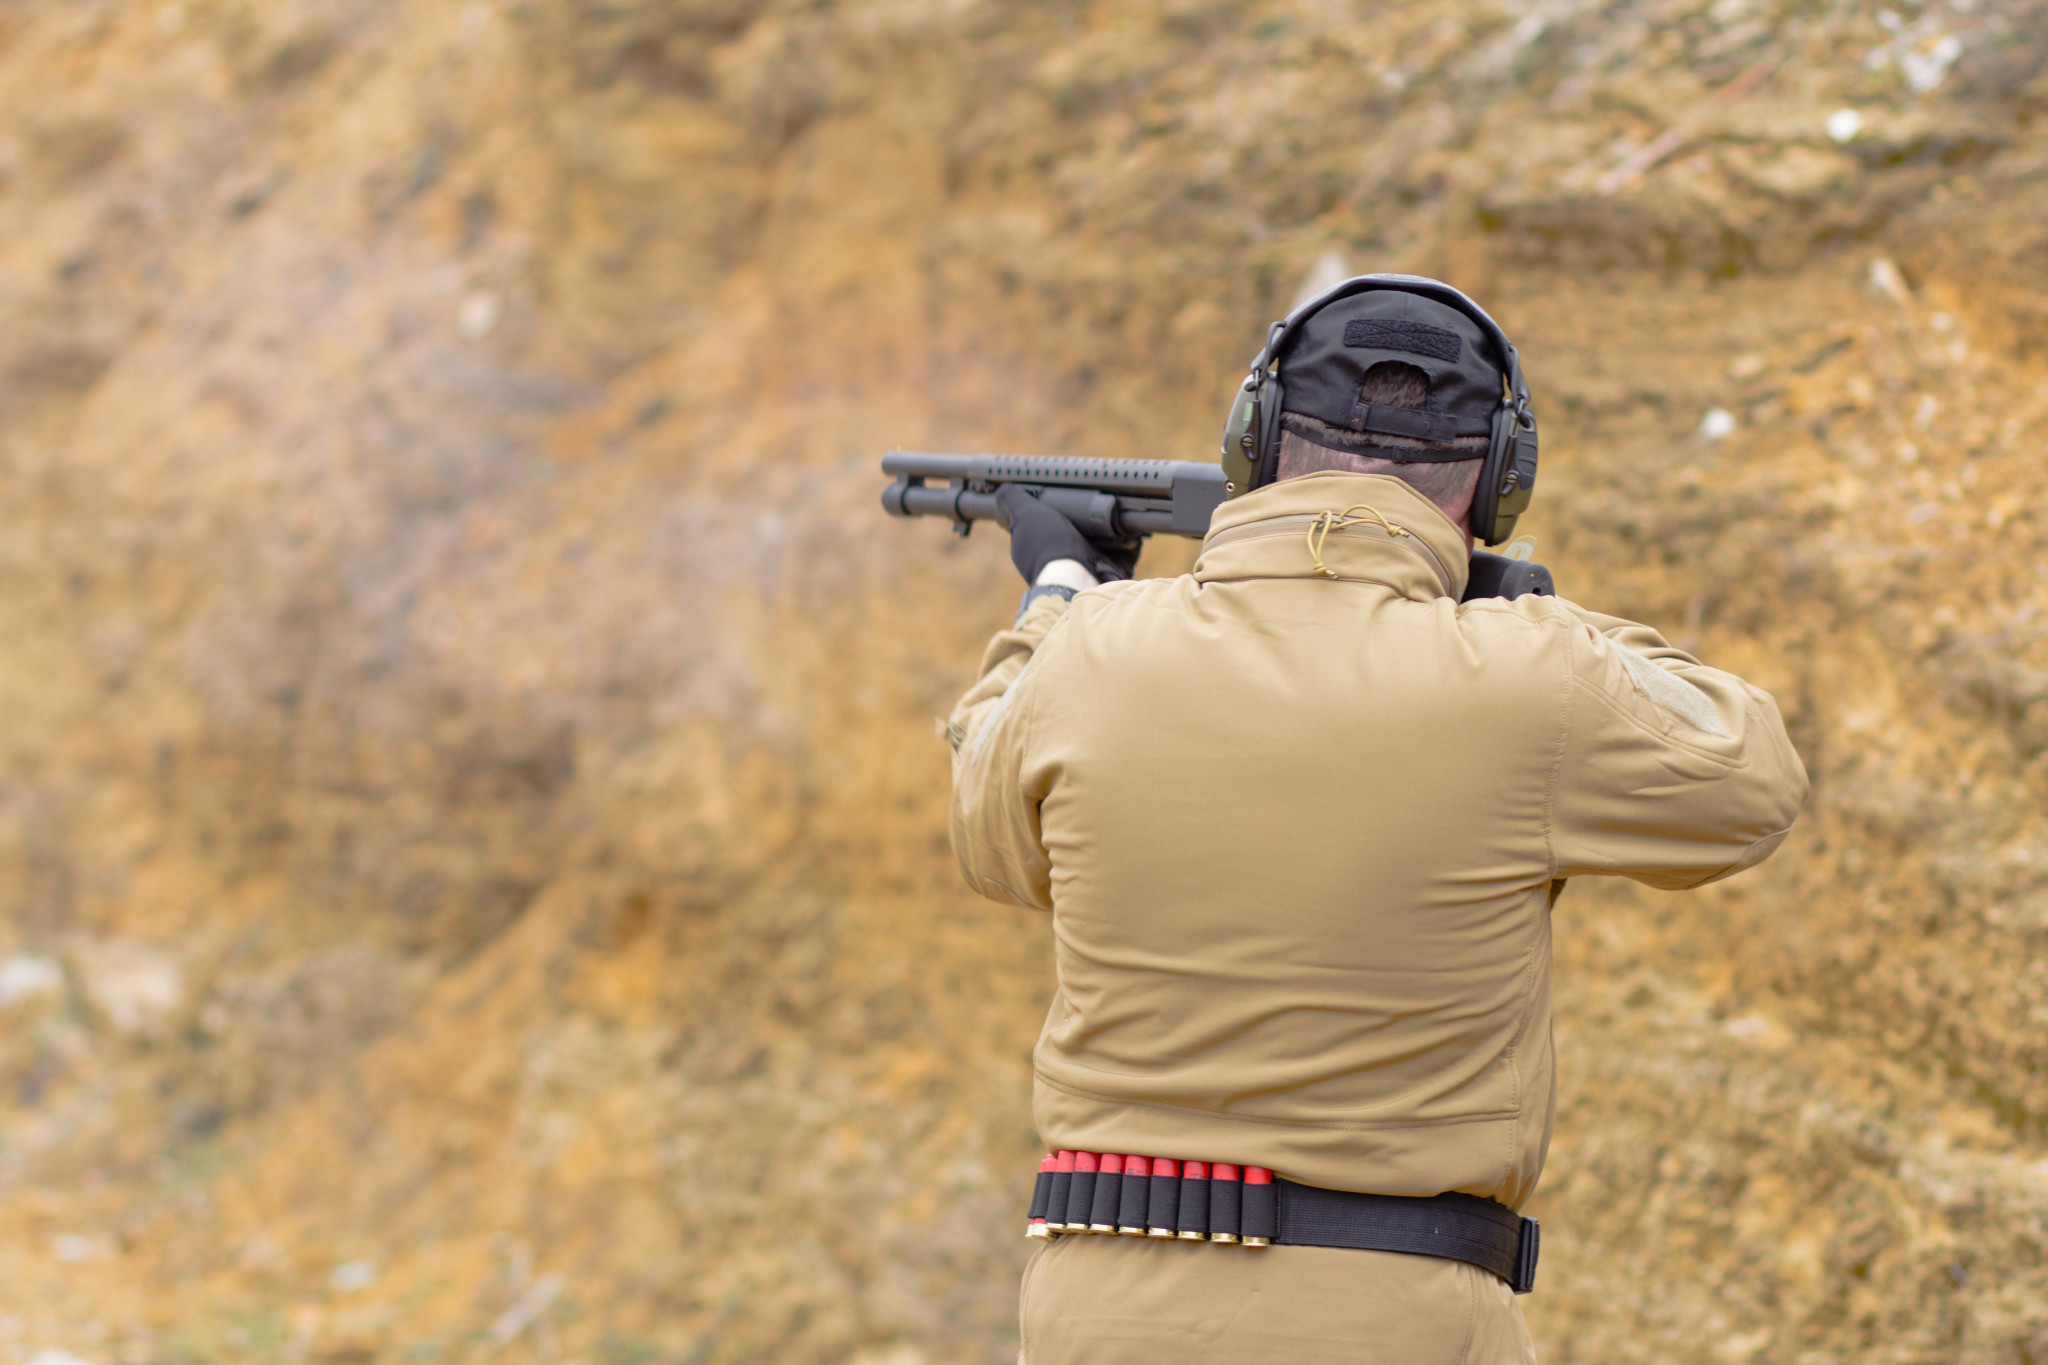 Recreational shooting range approved - feature photo